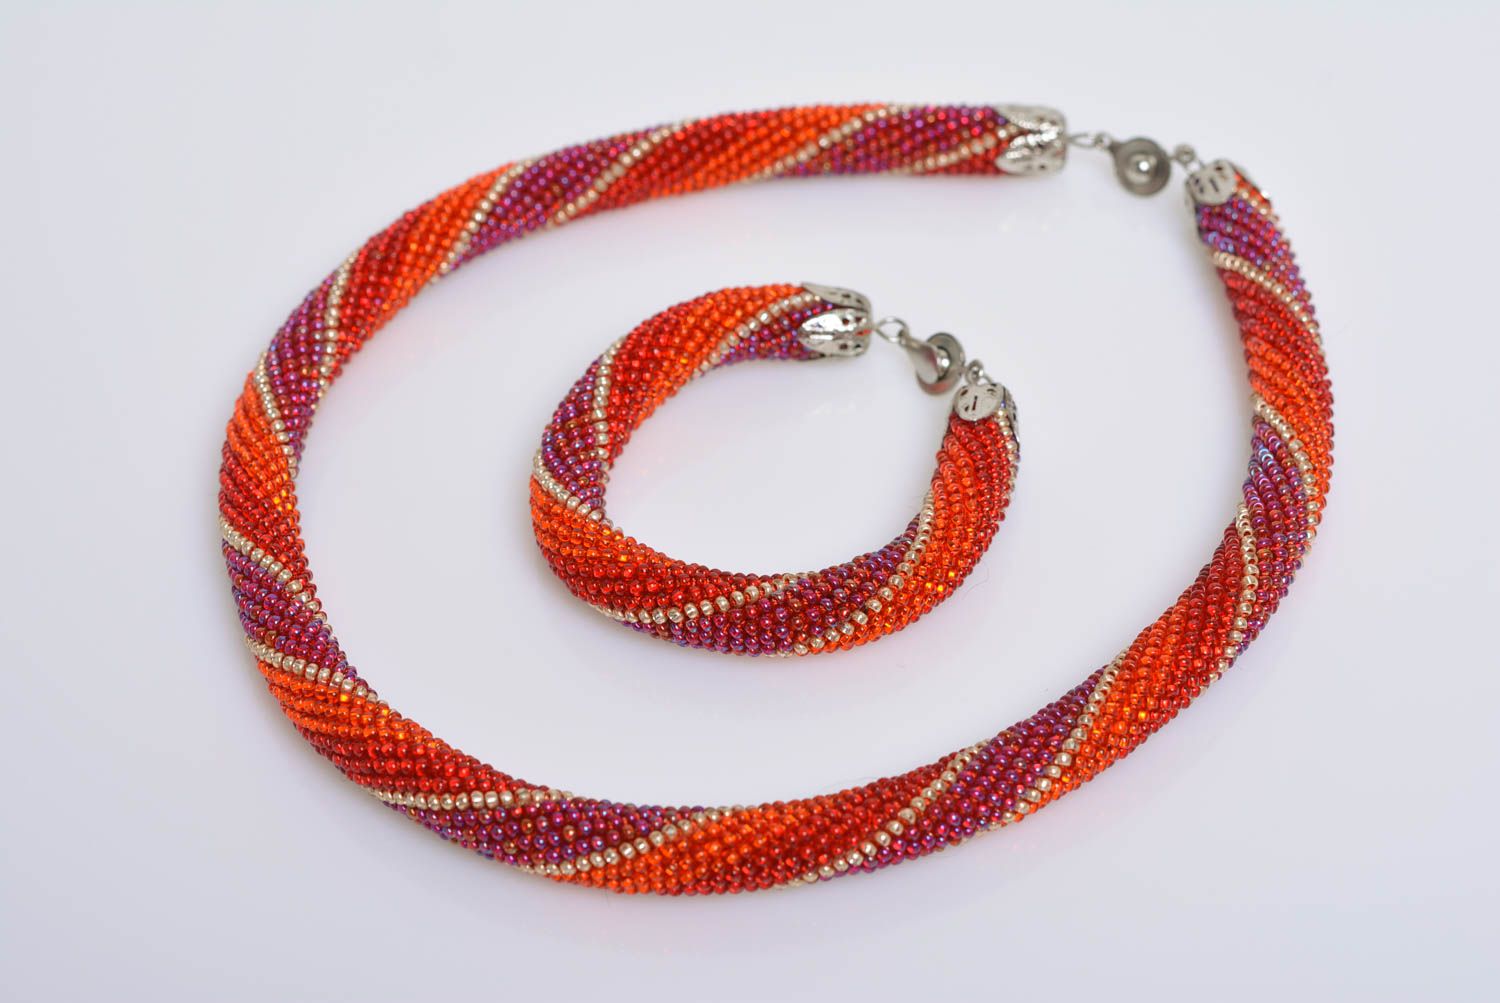 Set of handmade bright red striped bead woven jewelry bracelet and cord necklace photo 1